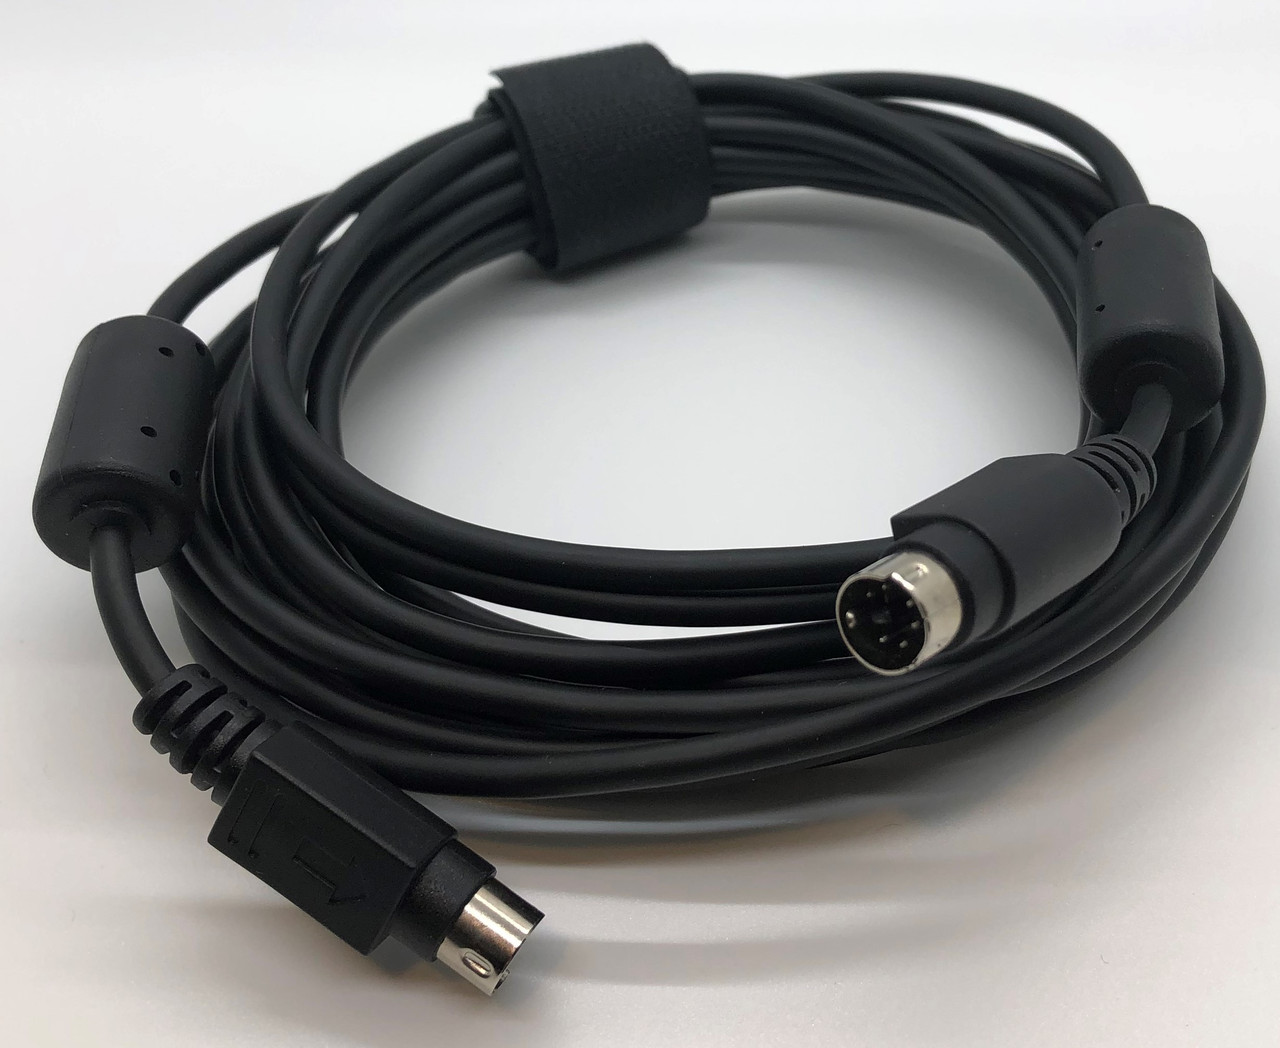 Logitech 6 Pin Replacement Cable For Video Conference Systems - Kraydad's  Cables and Parts